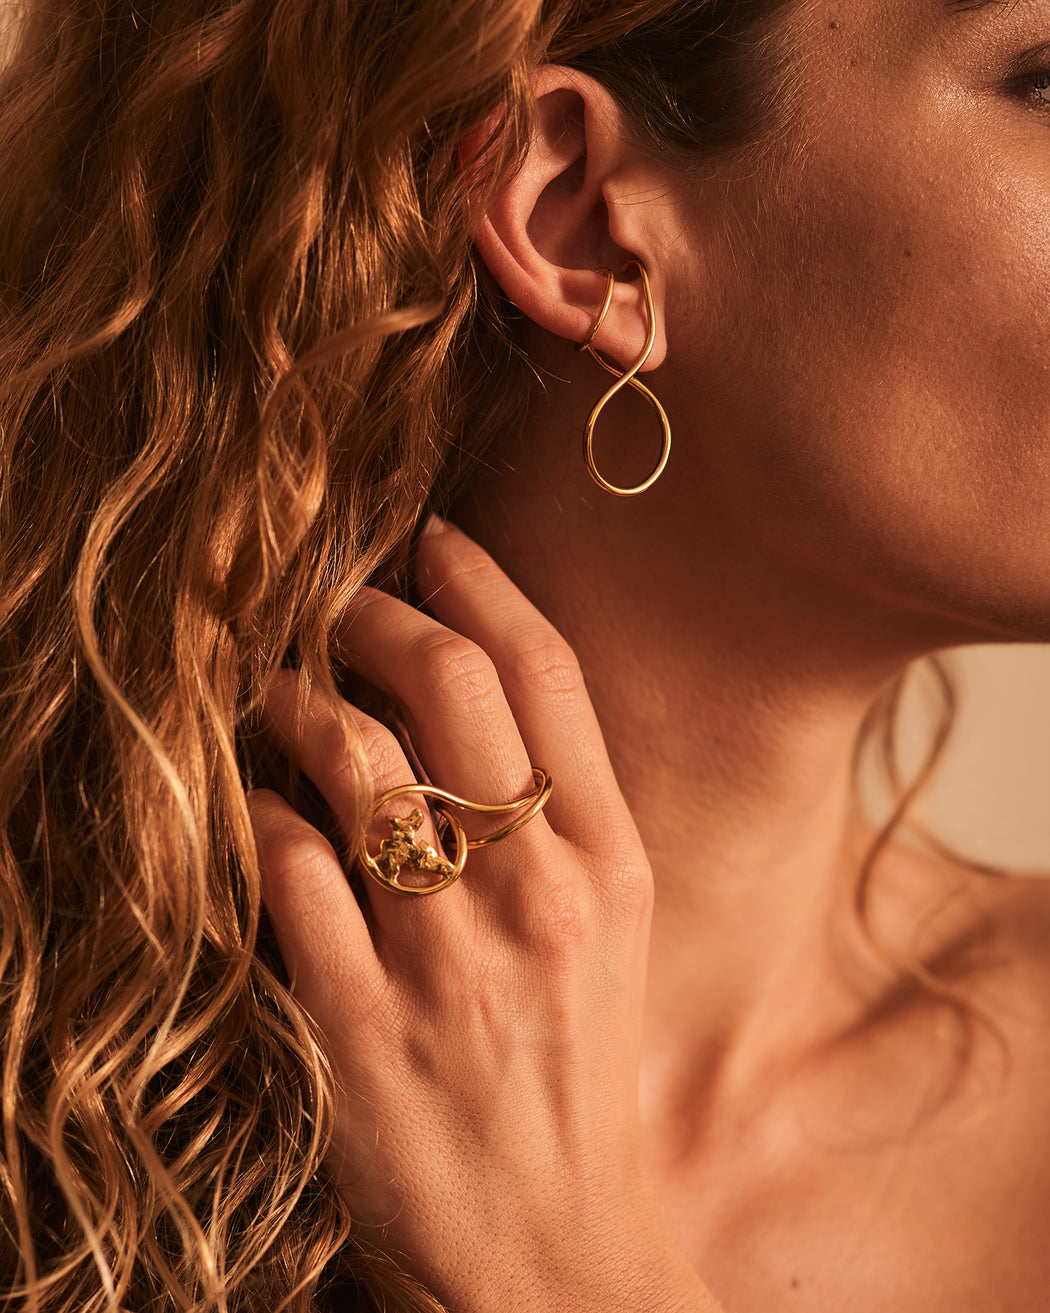 Ezili Earrings and Pepite II Ring in Vermeil, Worn Jewelry picture, Sarah Vankaster Handmade Jewelry, Flow Collection